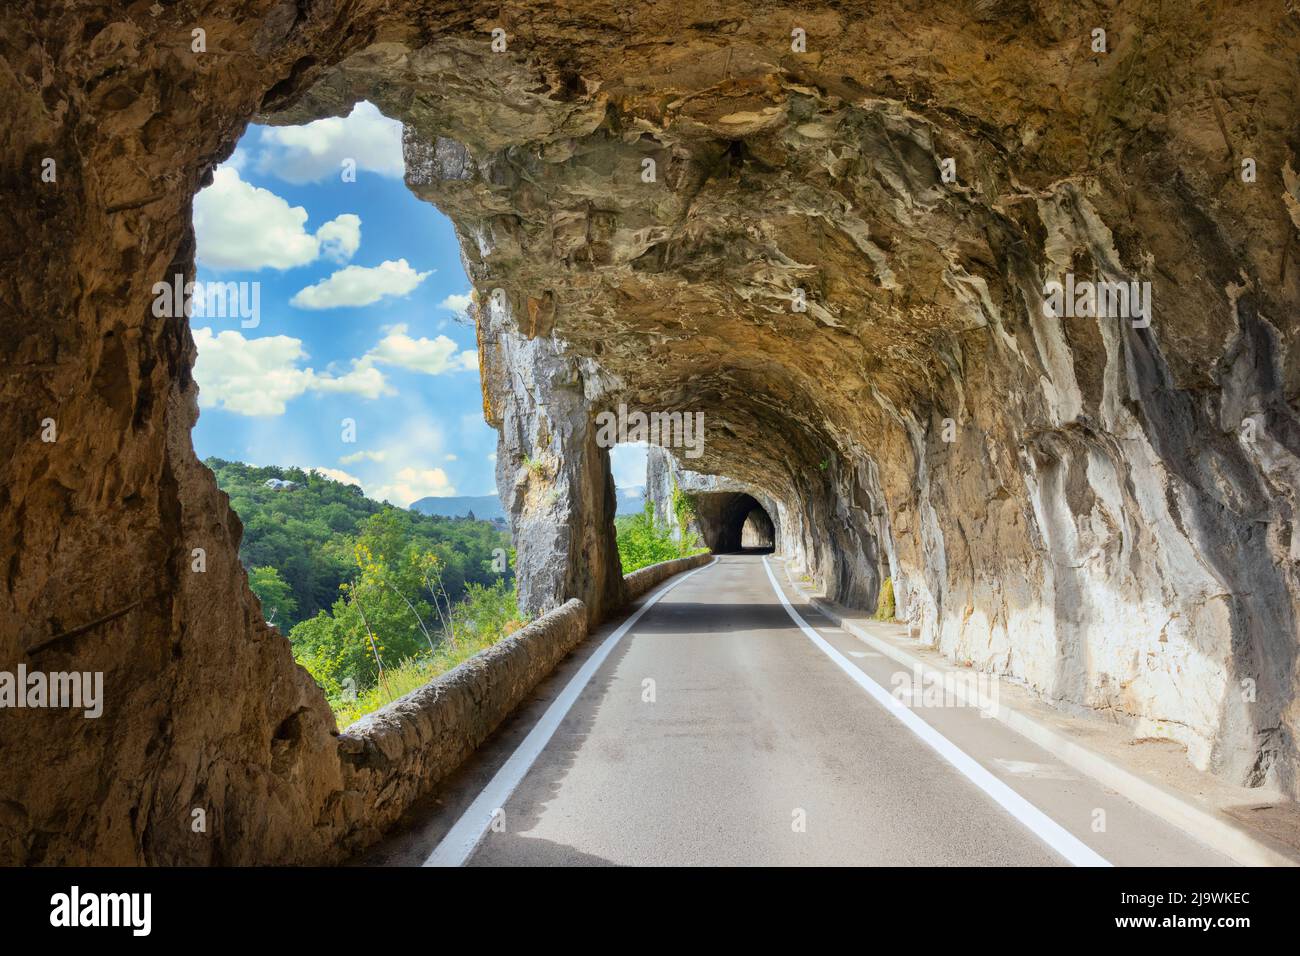 Famous road with arch in the rock called 'defile de Ruoms' at Ruoms, France, Europe Stock Photo